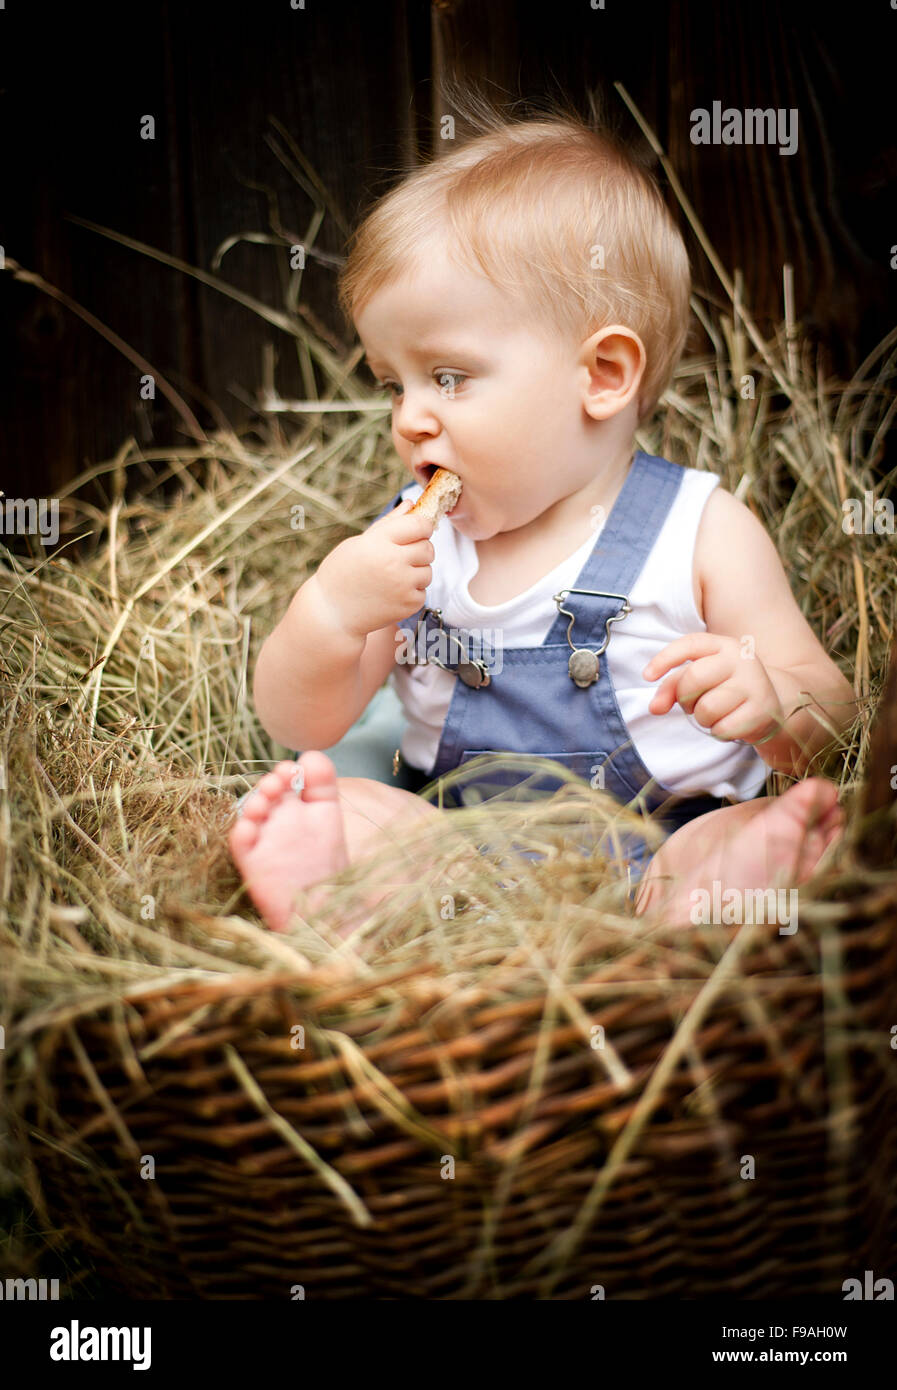 Little boy is siting in the wooden basket Stock Photo